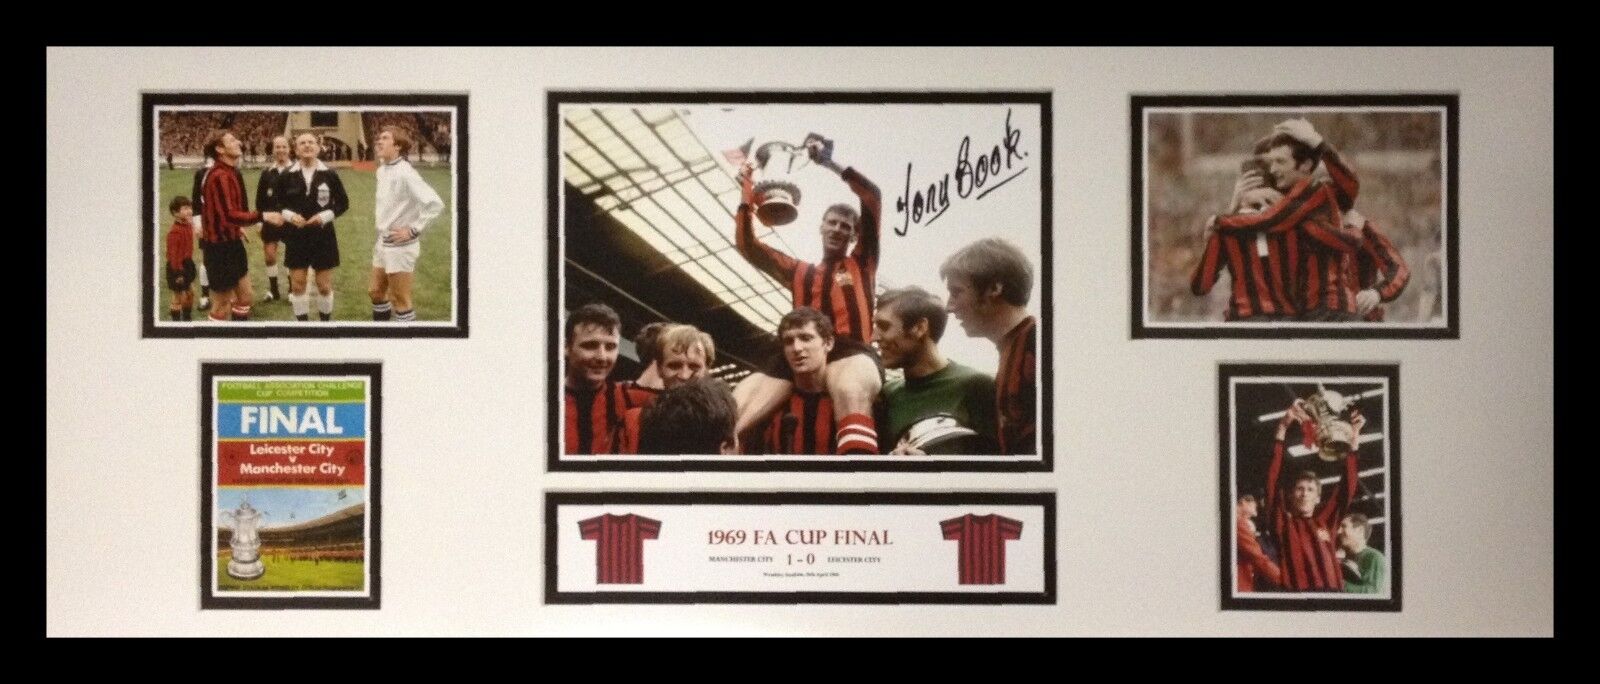 FRAMED TONY BOOK SIGNED MANCHESTER CITY 30x12 Photo Poster painting 1969 FA CUP FINAL MCFC PROOF